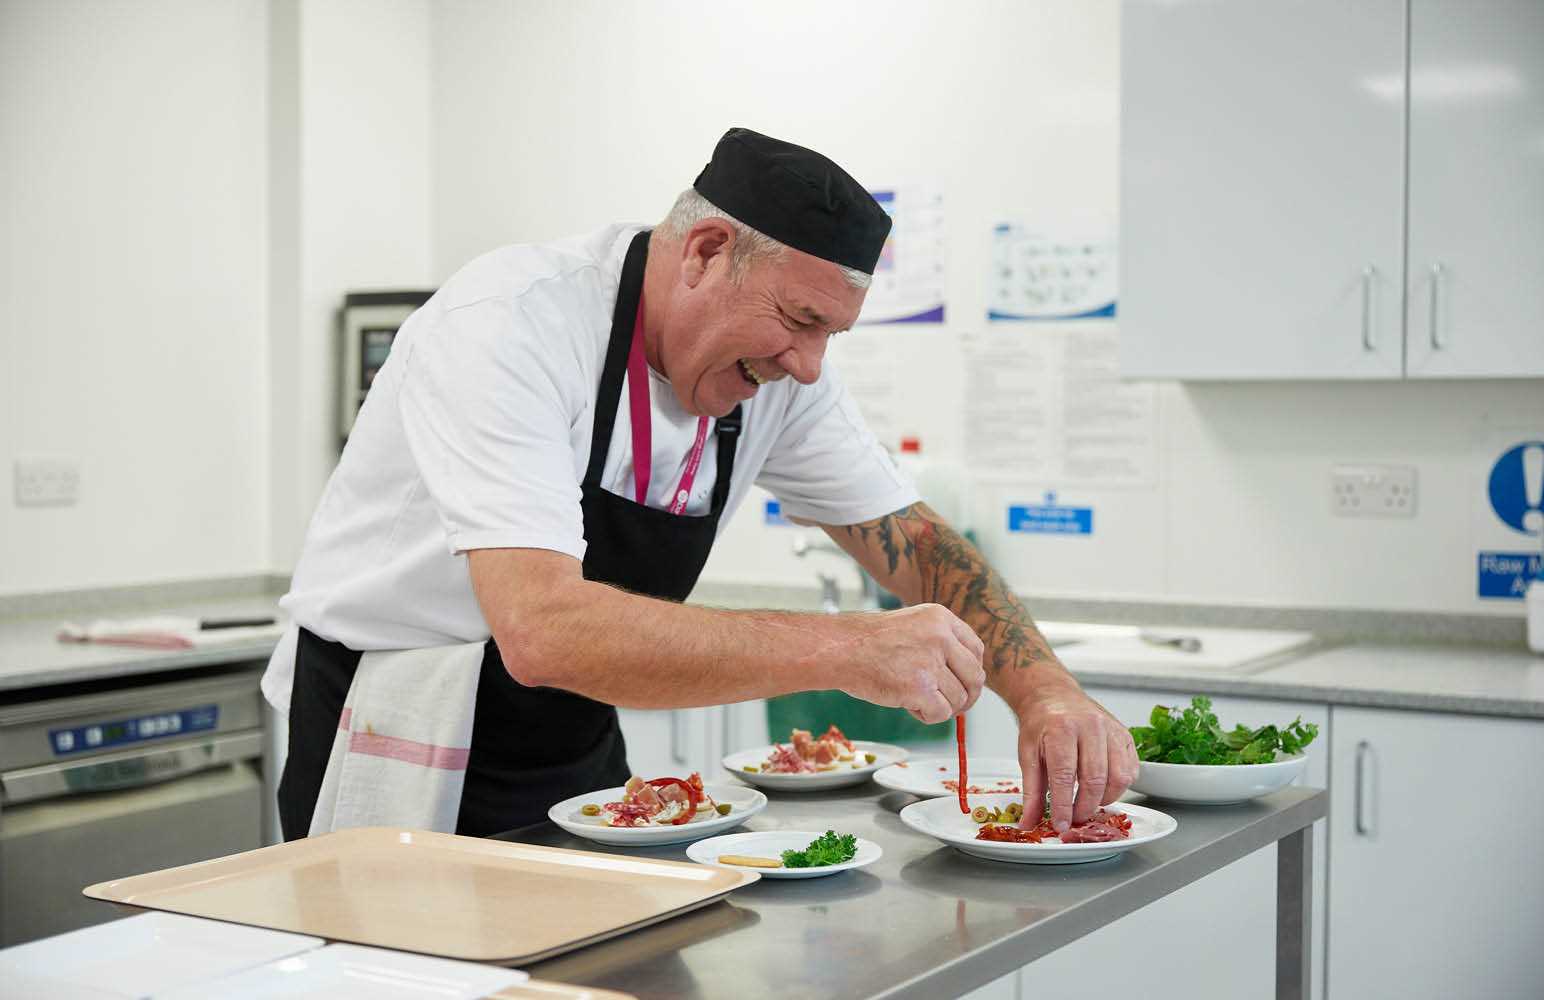 Our hospice chef, Paul Evans